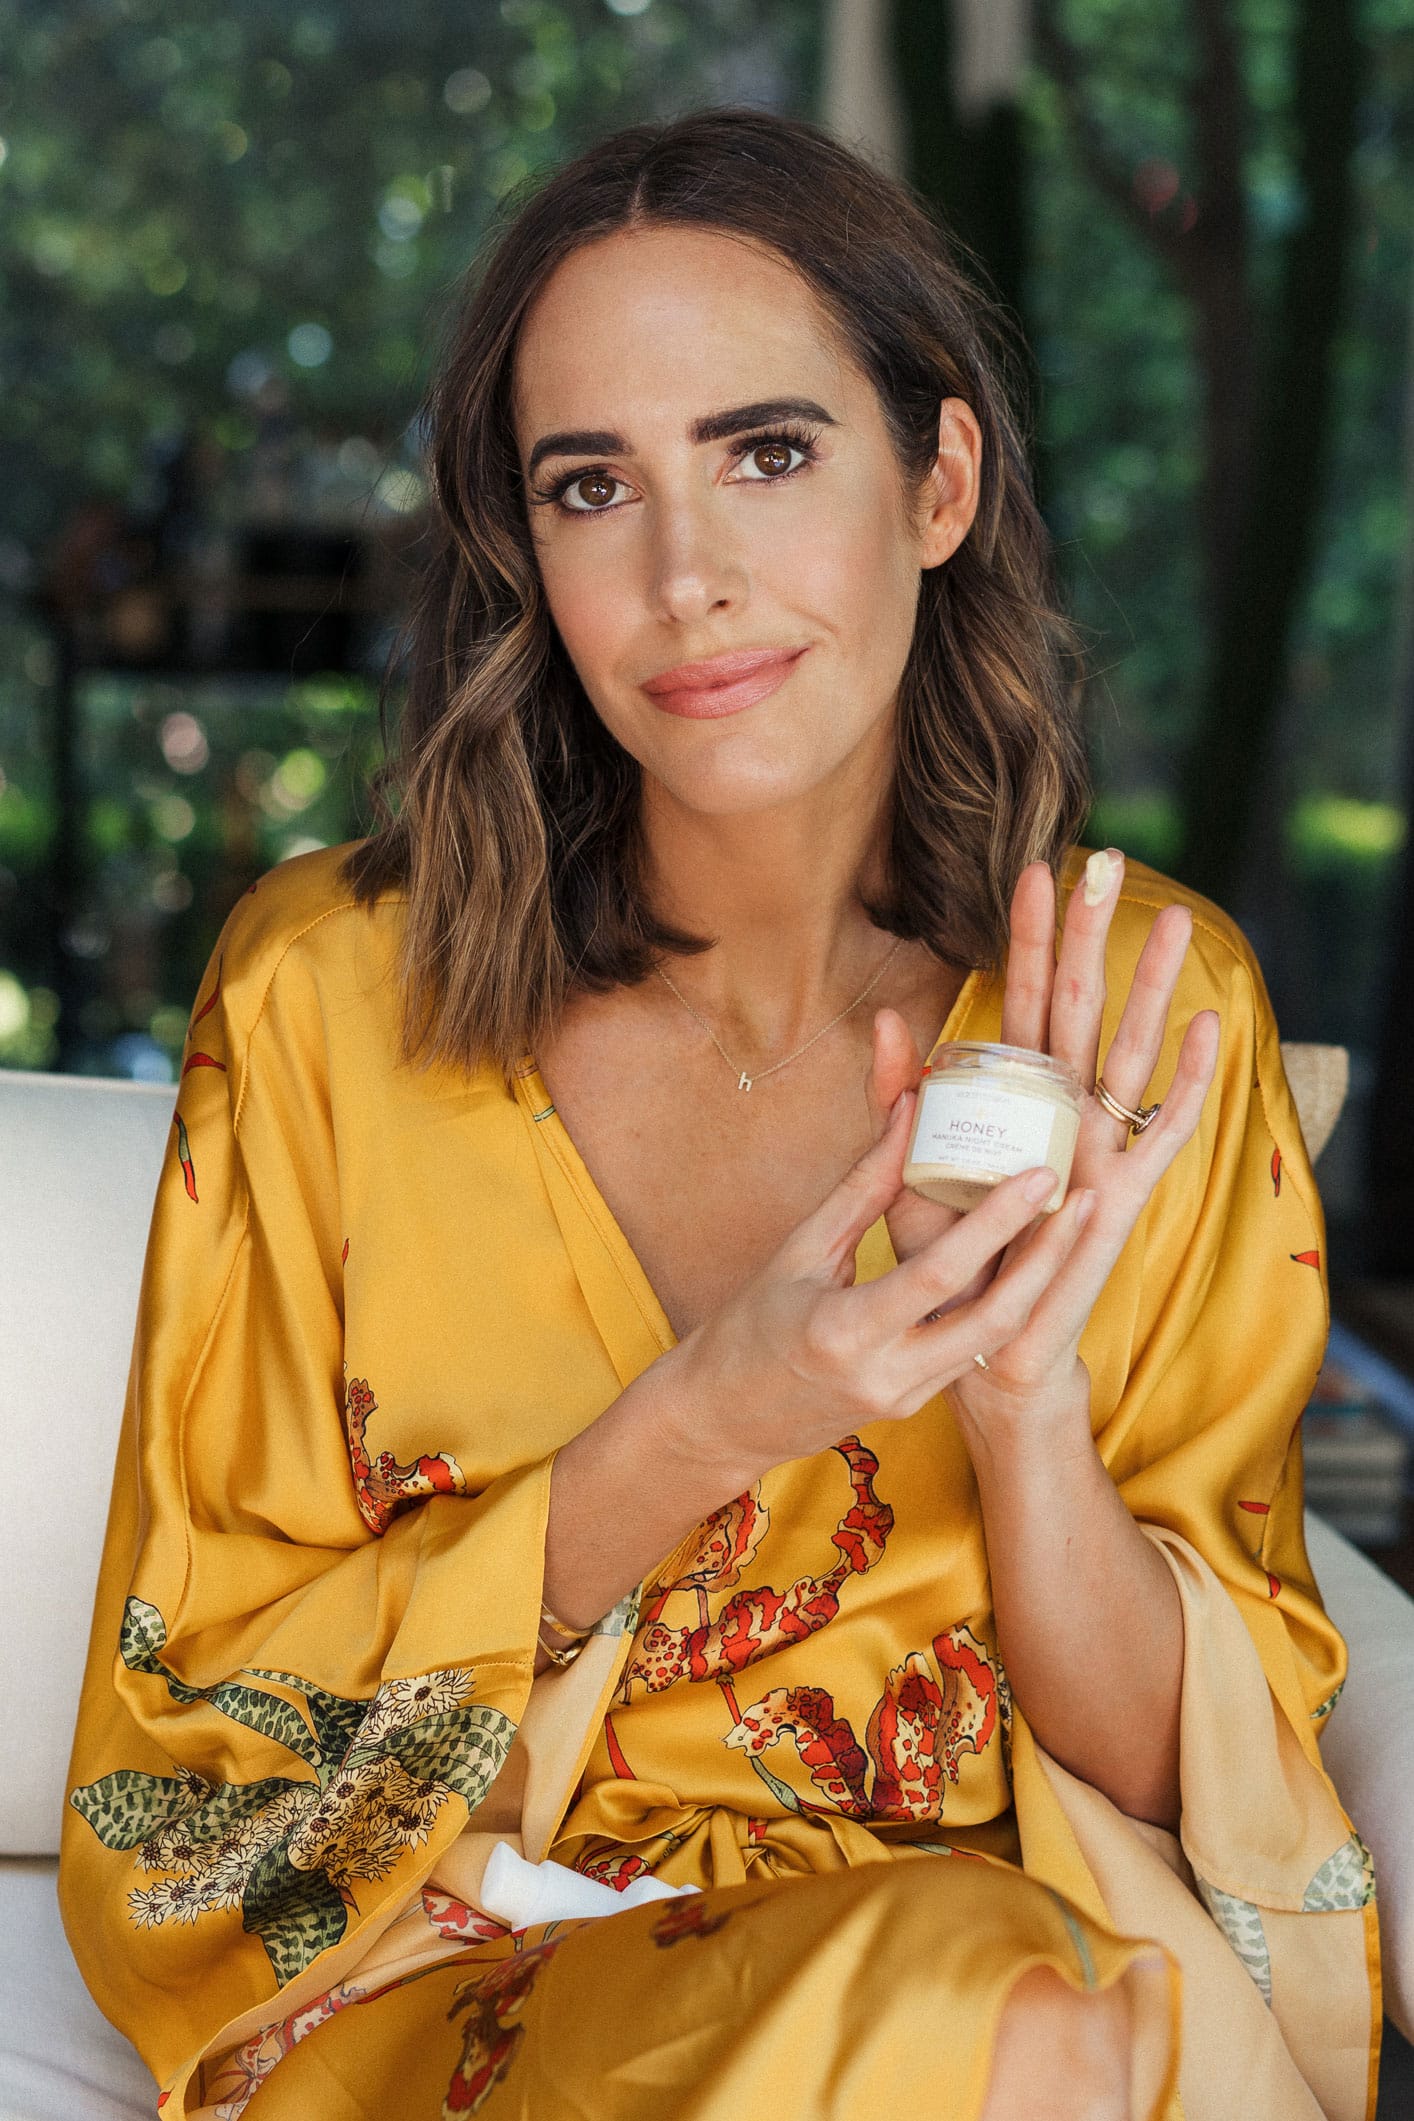 Louise Roe of Front Roe chooses her favorite Earth to Skin products